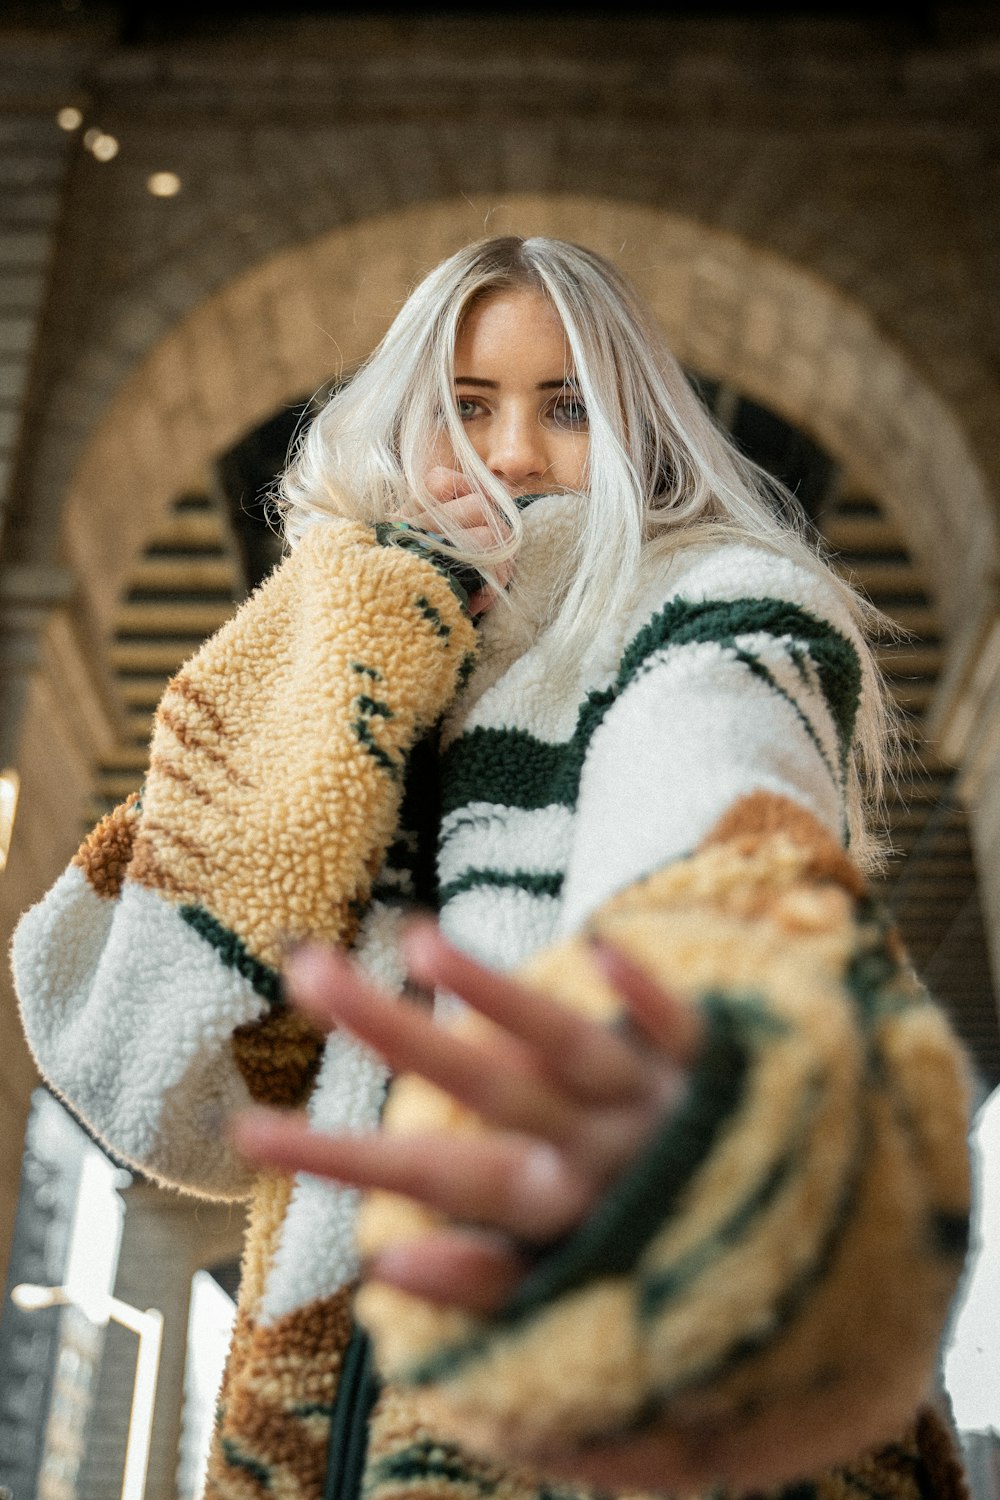 a woman with white hair is holding a stuffed animal